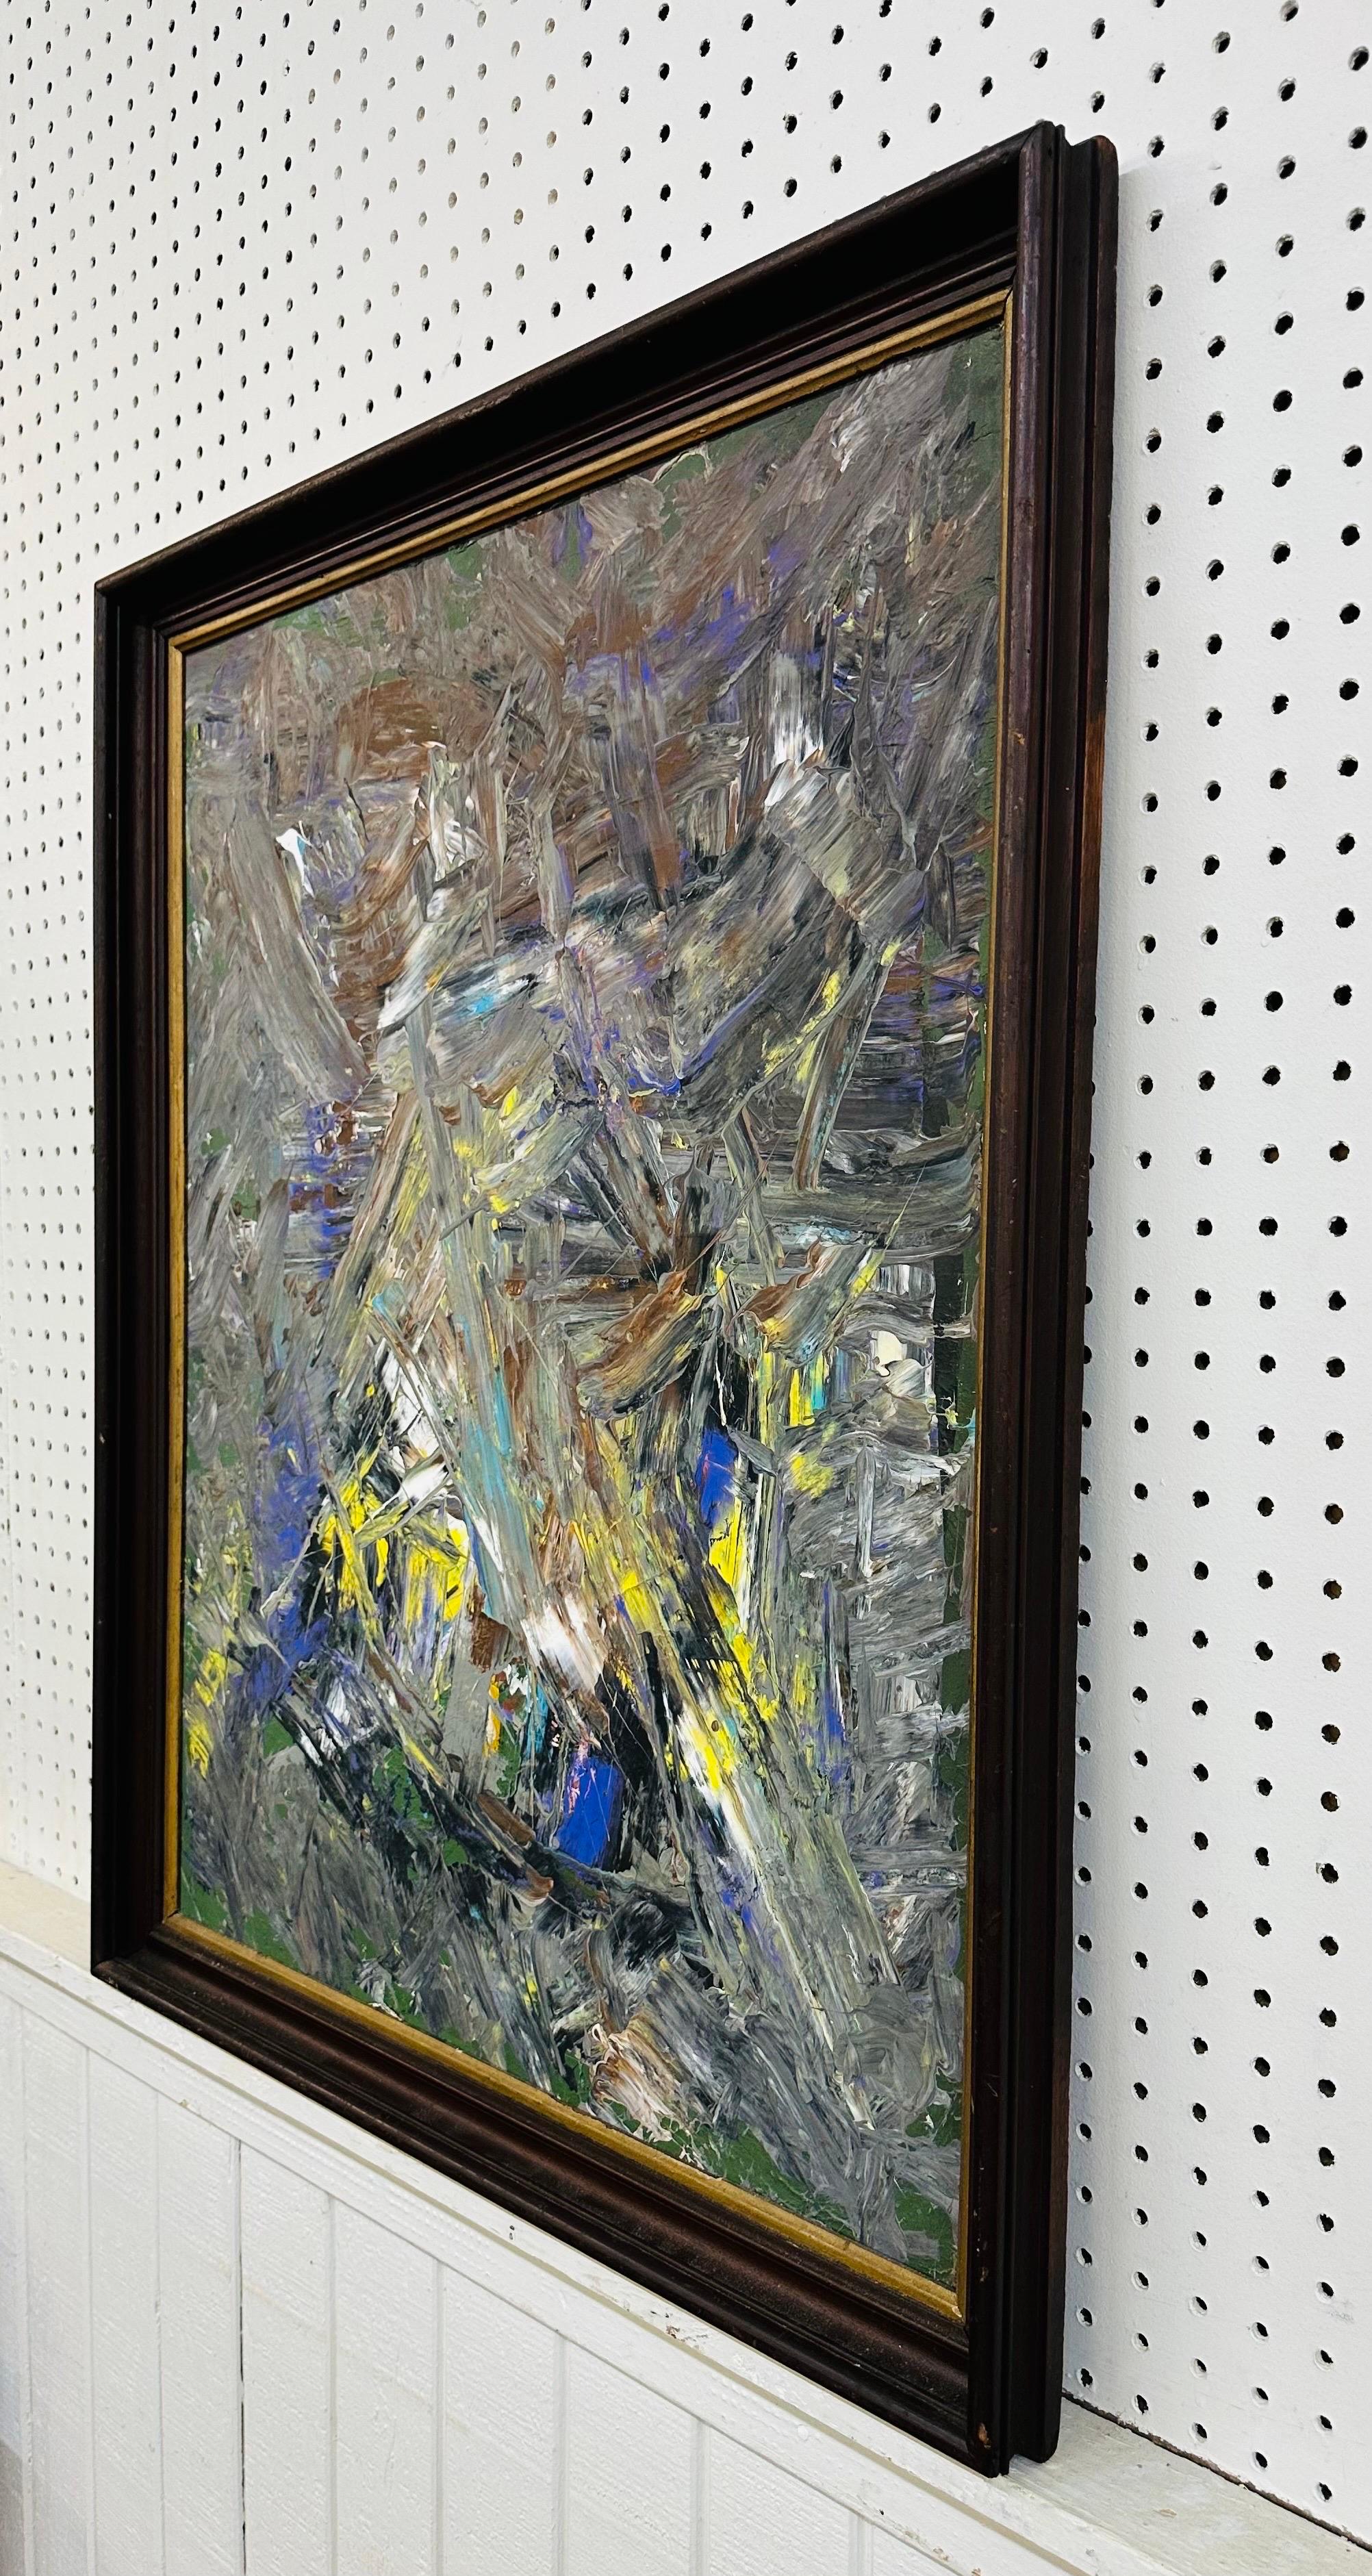 This listing is for a Modern Expressionist Abstract Painting. Featuring a vintage wood frame, original expressionist style abstract art with a mixture of colors, and a wire on the back for hanging. This is an exceptional piece by artist Mullin.